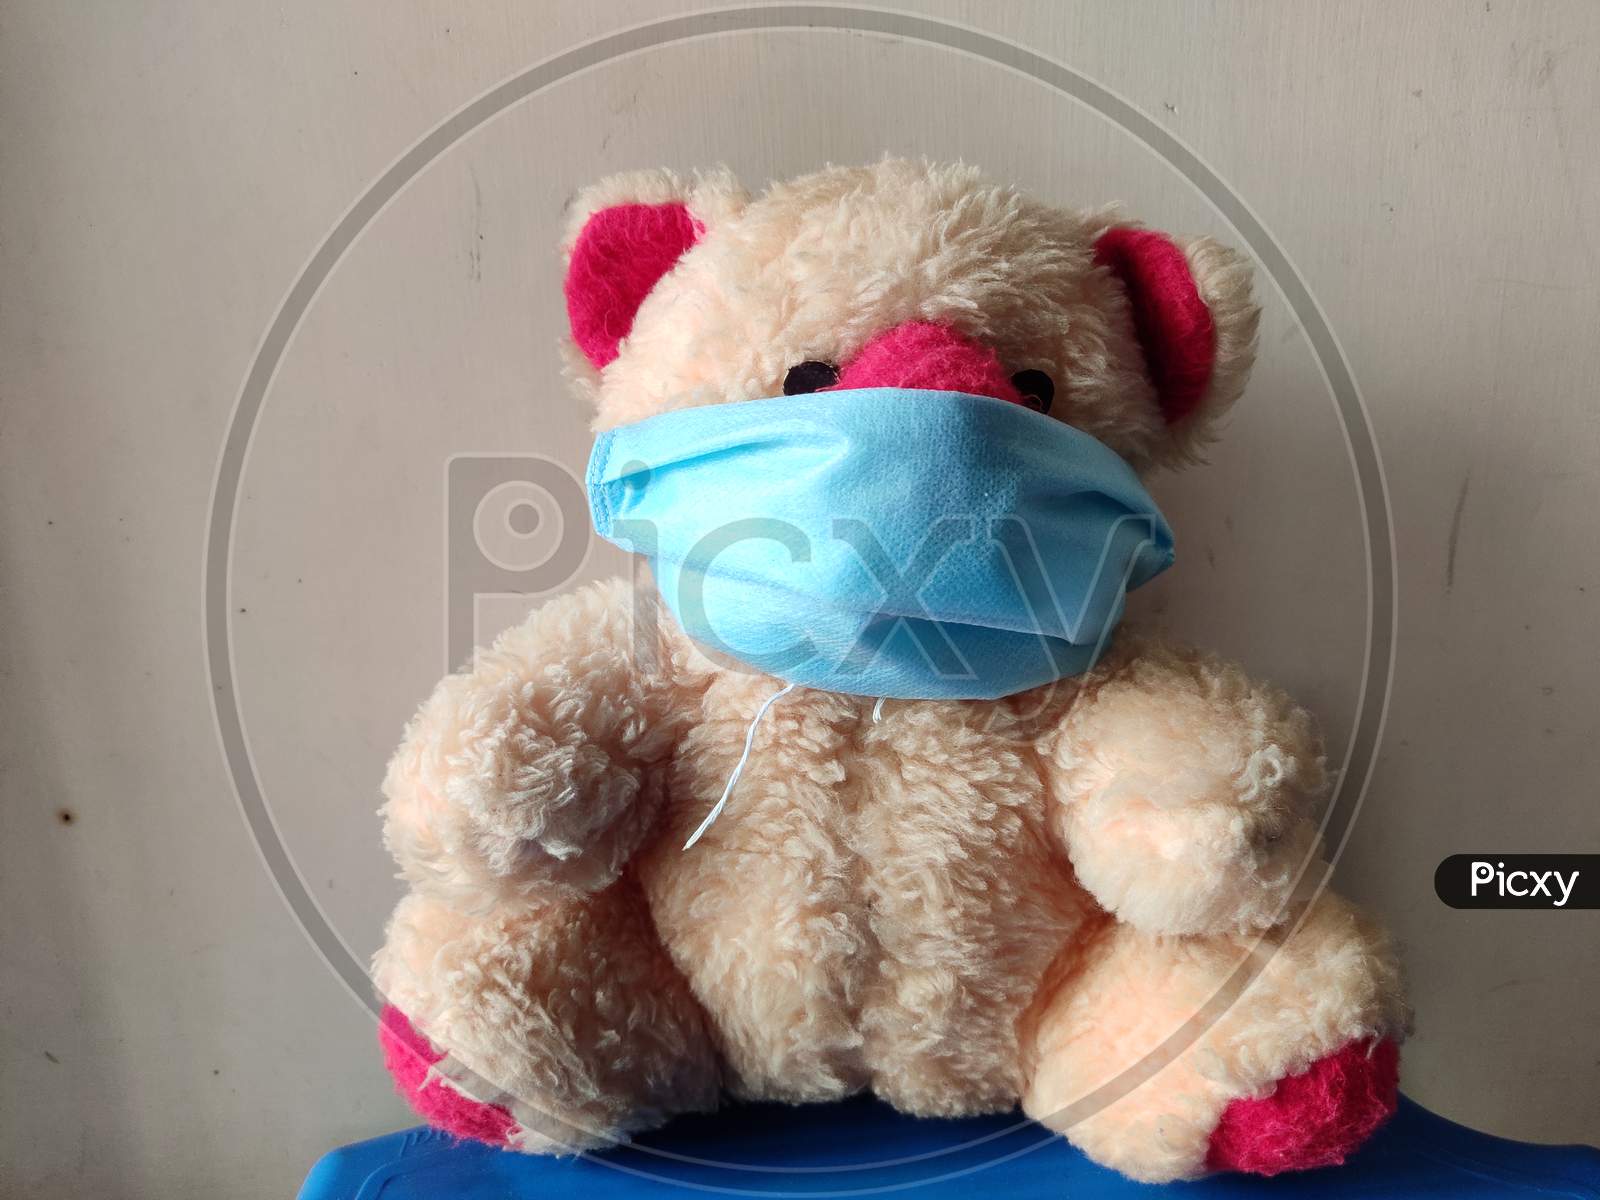 A Teddy bear in a medical mask, concept of COVID-19